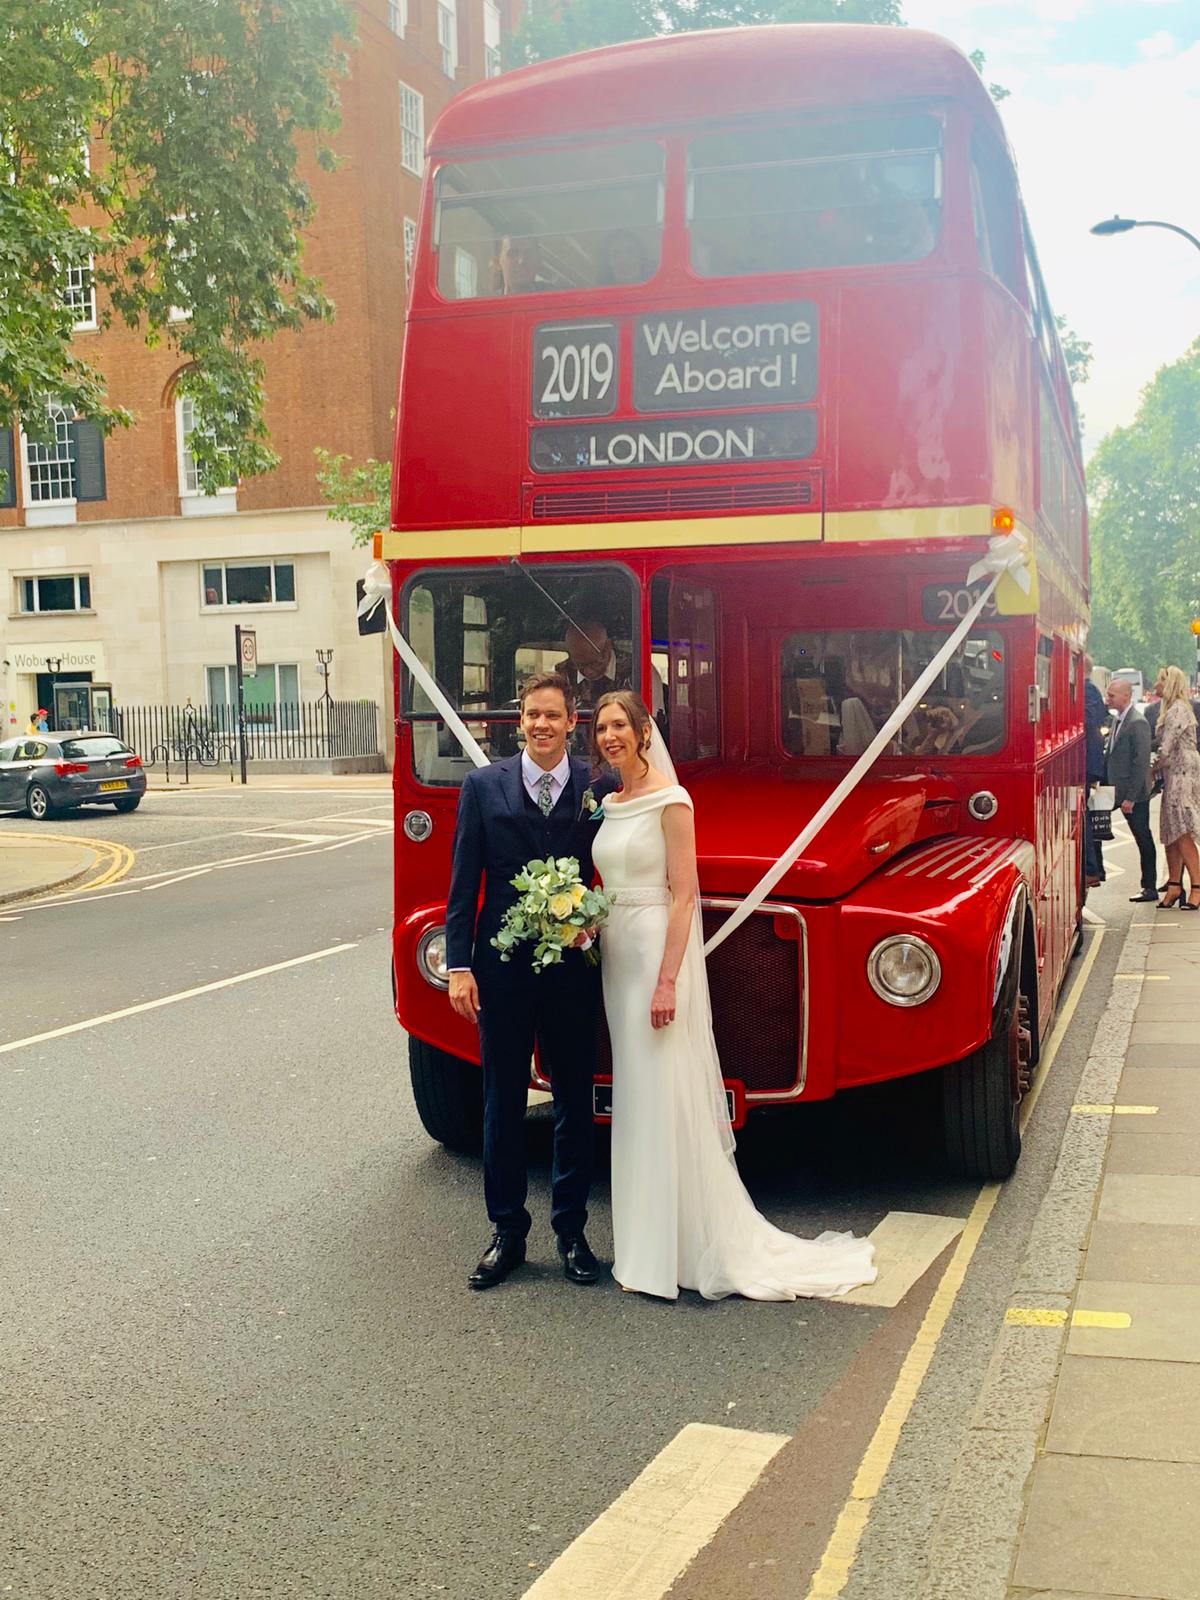 Wedding bus hire in Routemaster